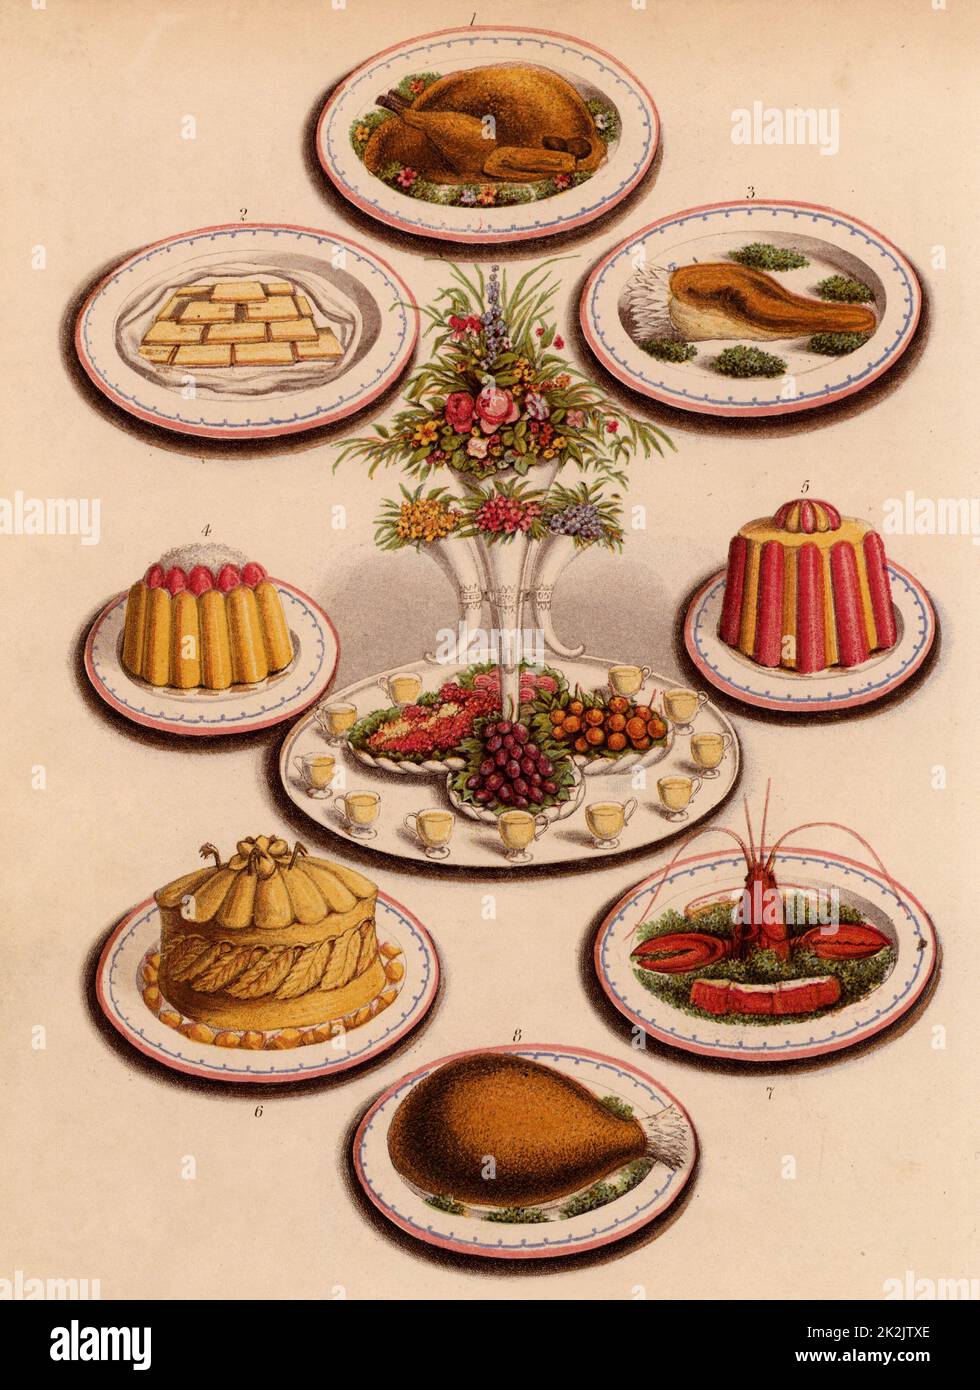 Sweet and savoury dishes for a buffet. The centrepiece is an epergne of flowers on a tray with fruit and custard glasses and a moulded jelly on either side. Other dishes are a turkey, a ham, sandwiches, a boiled tongue, game pie with aspic jelly, and lobster. Chromolithograph from 'Cassell's Book of the Household' (London, c1895). Stock Photo